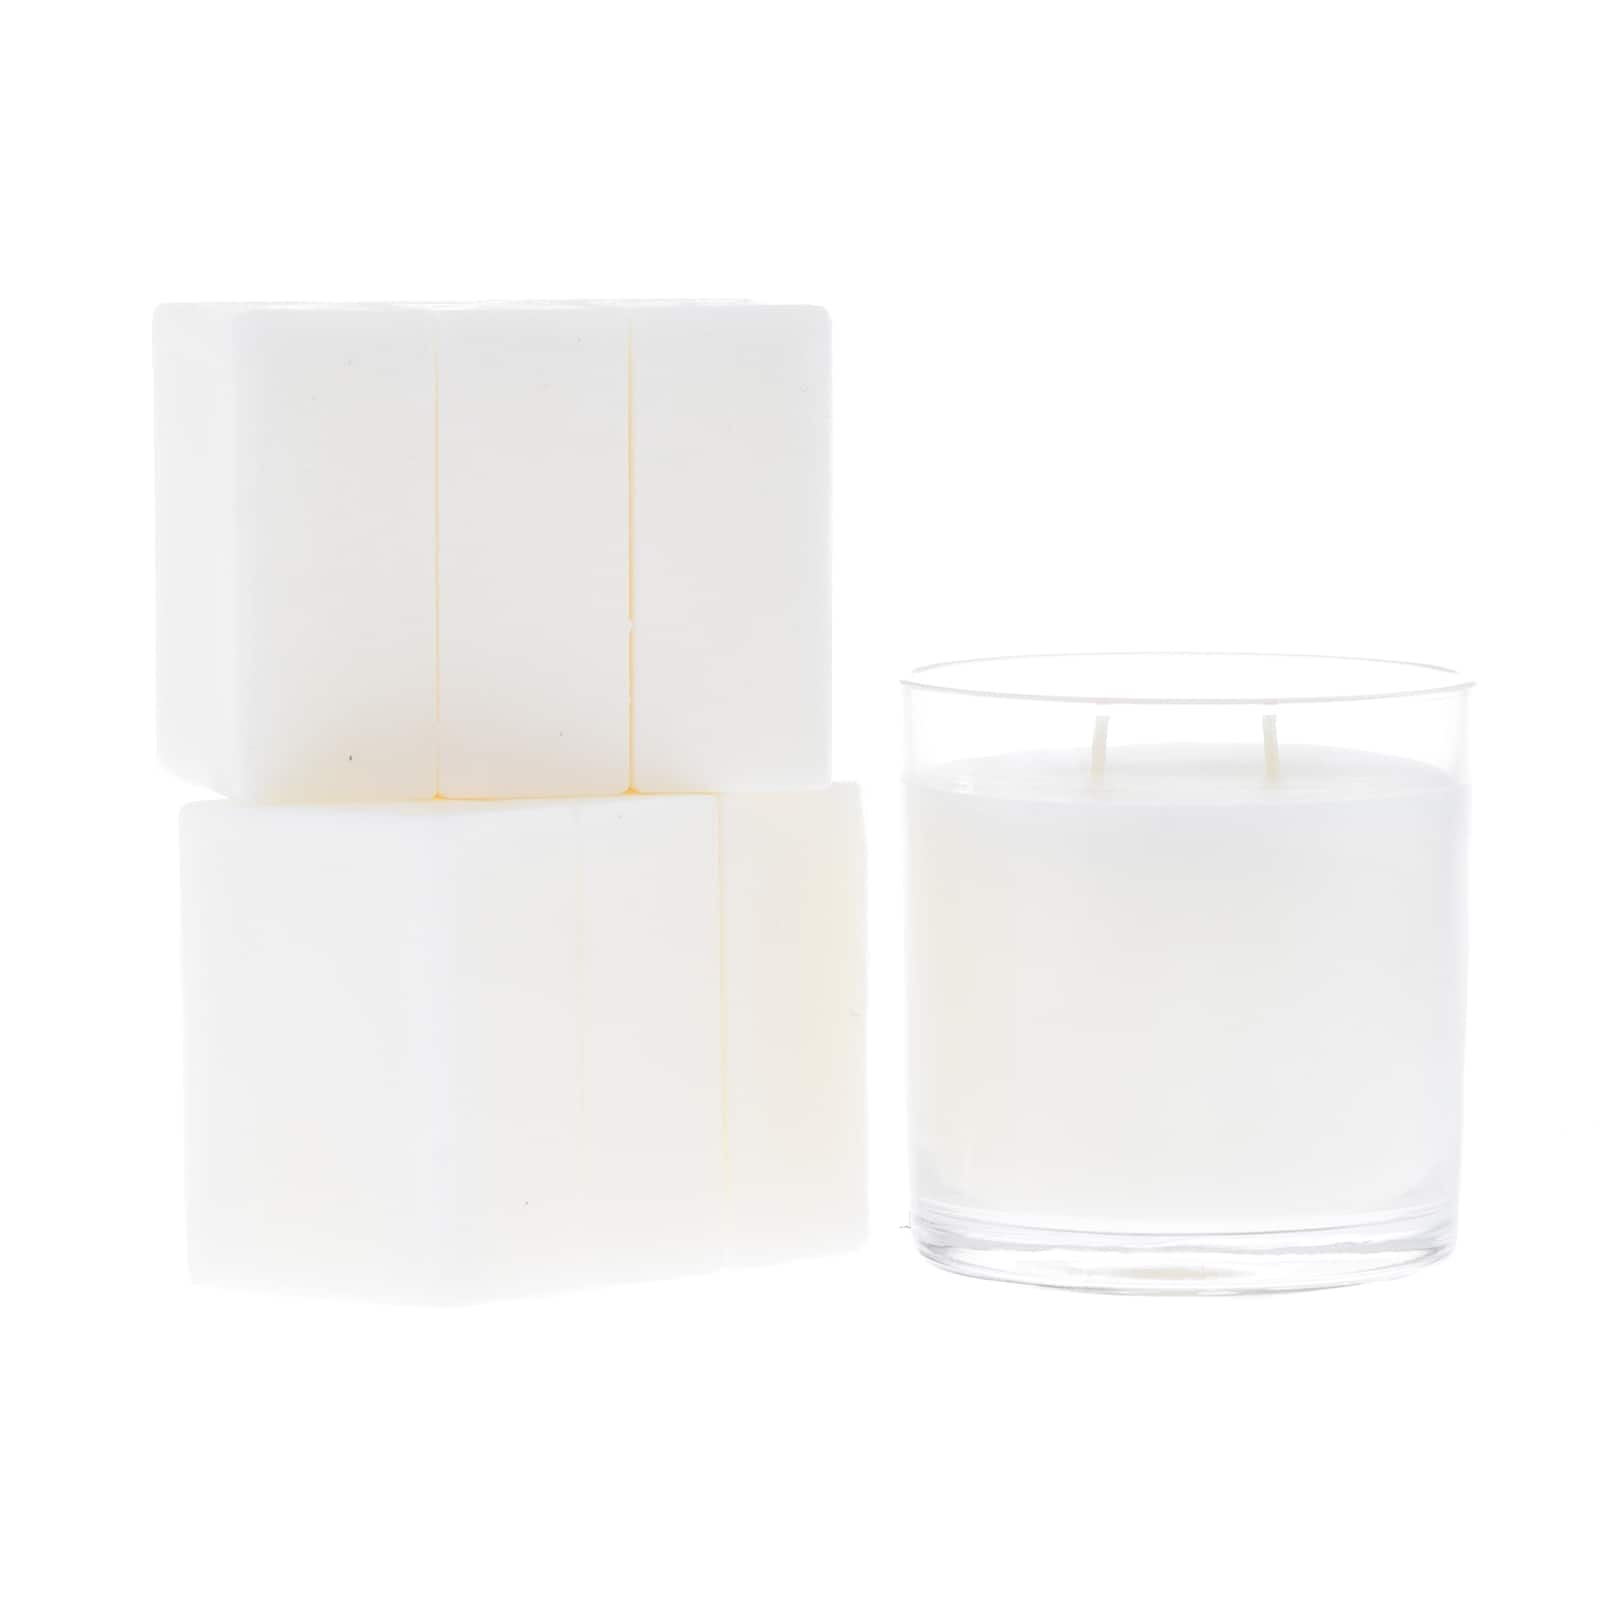 paraffin wax wholesale candle making fully